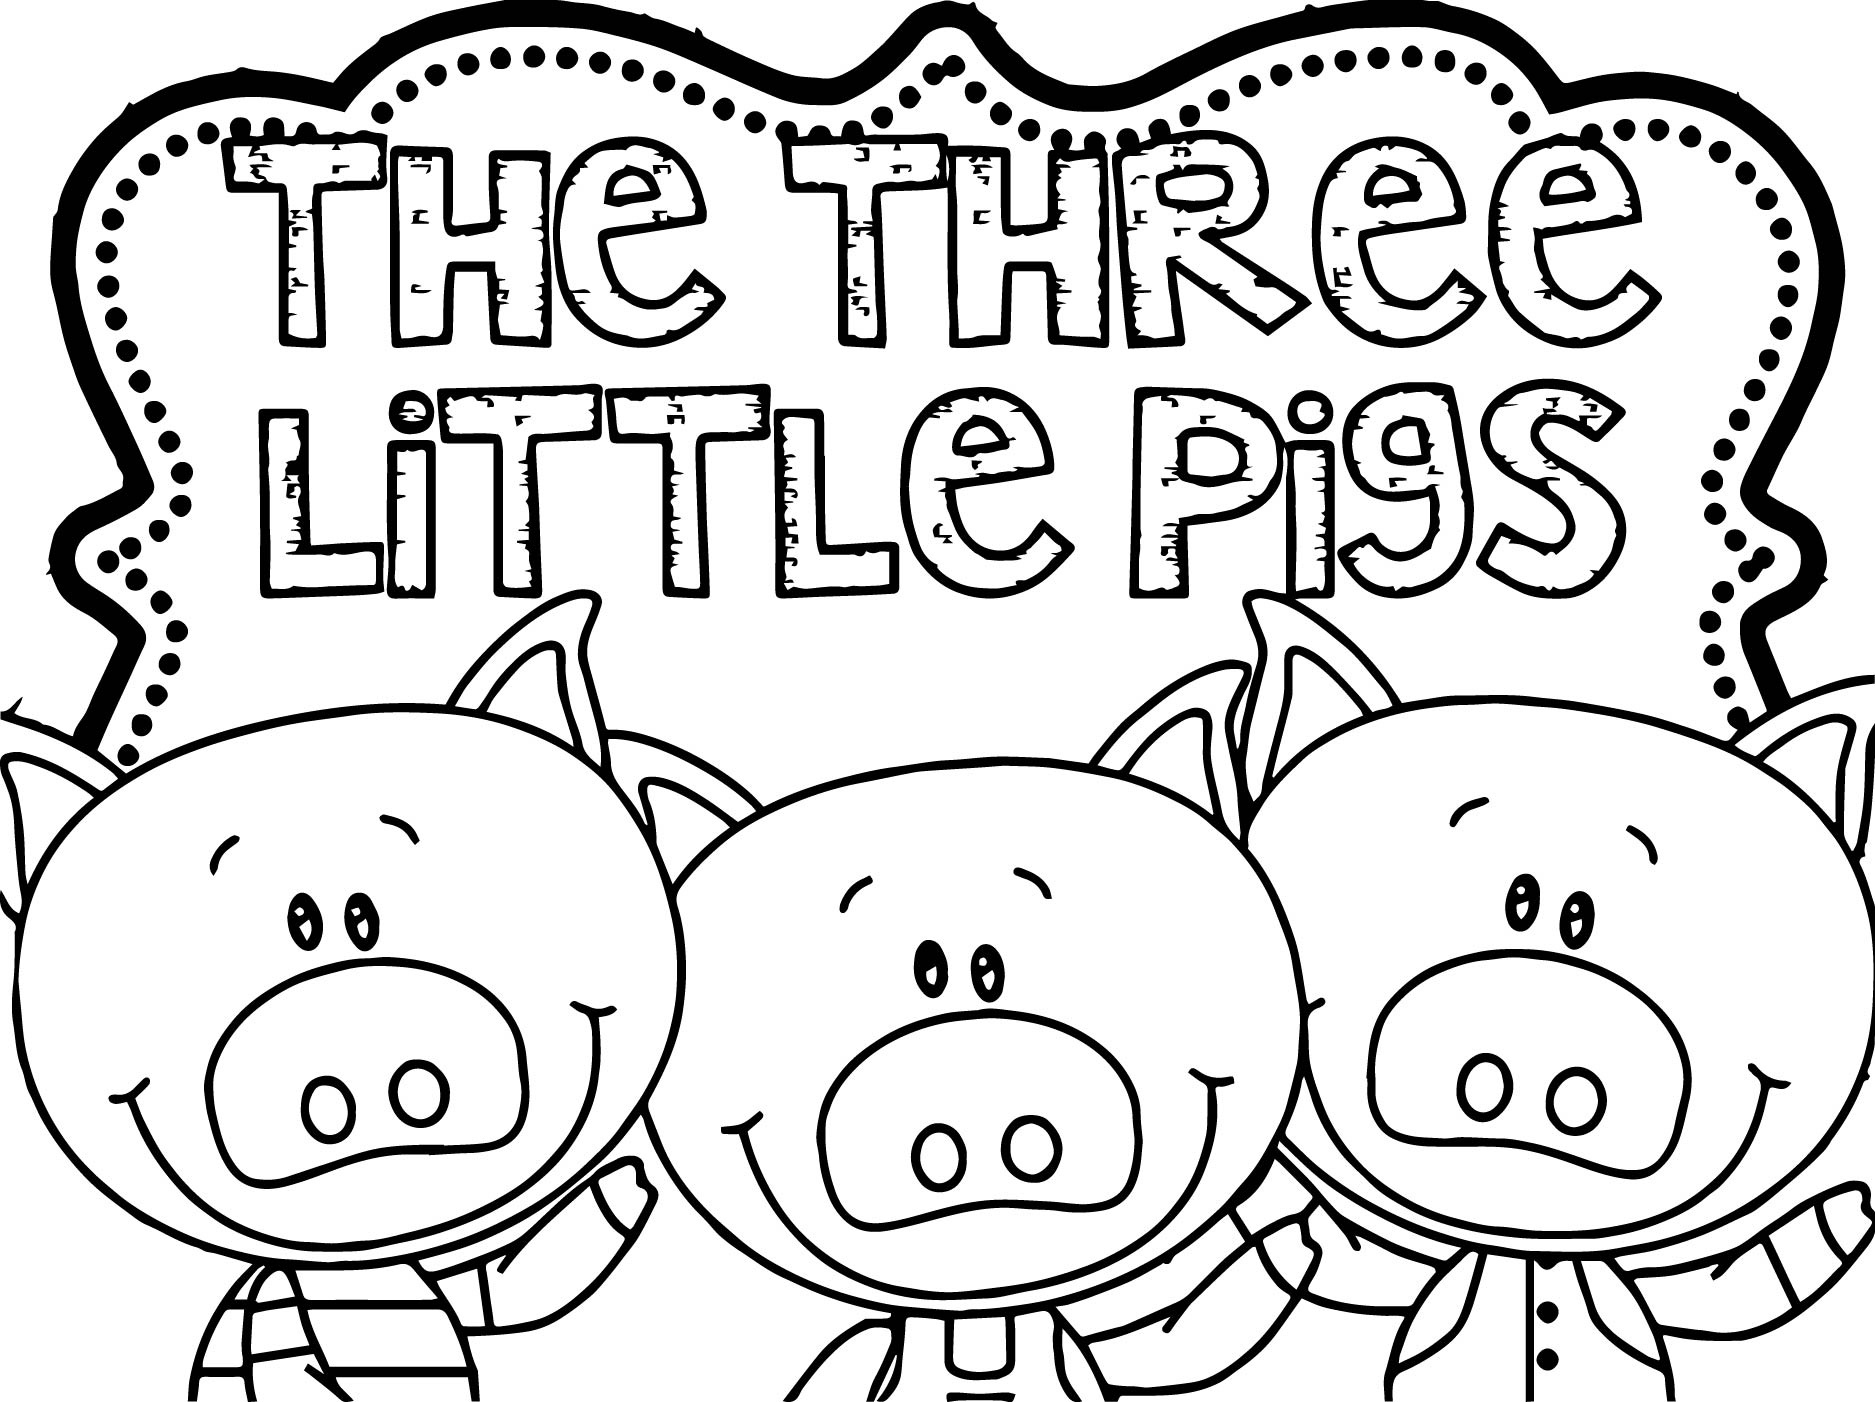 Three Little Pigs Houses Coloring Pages at GetColorings com Free